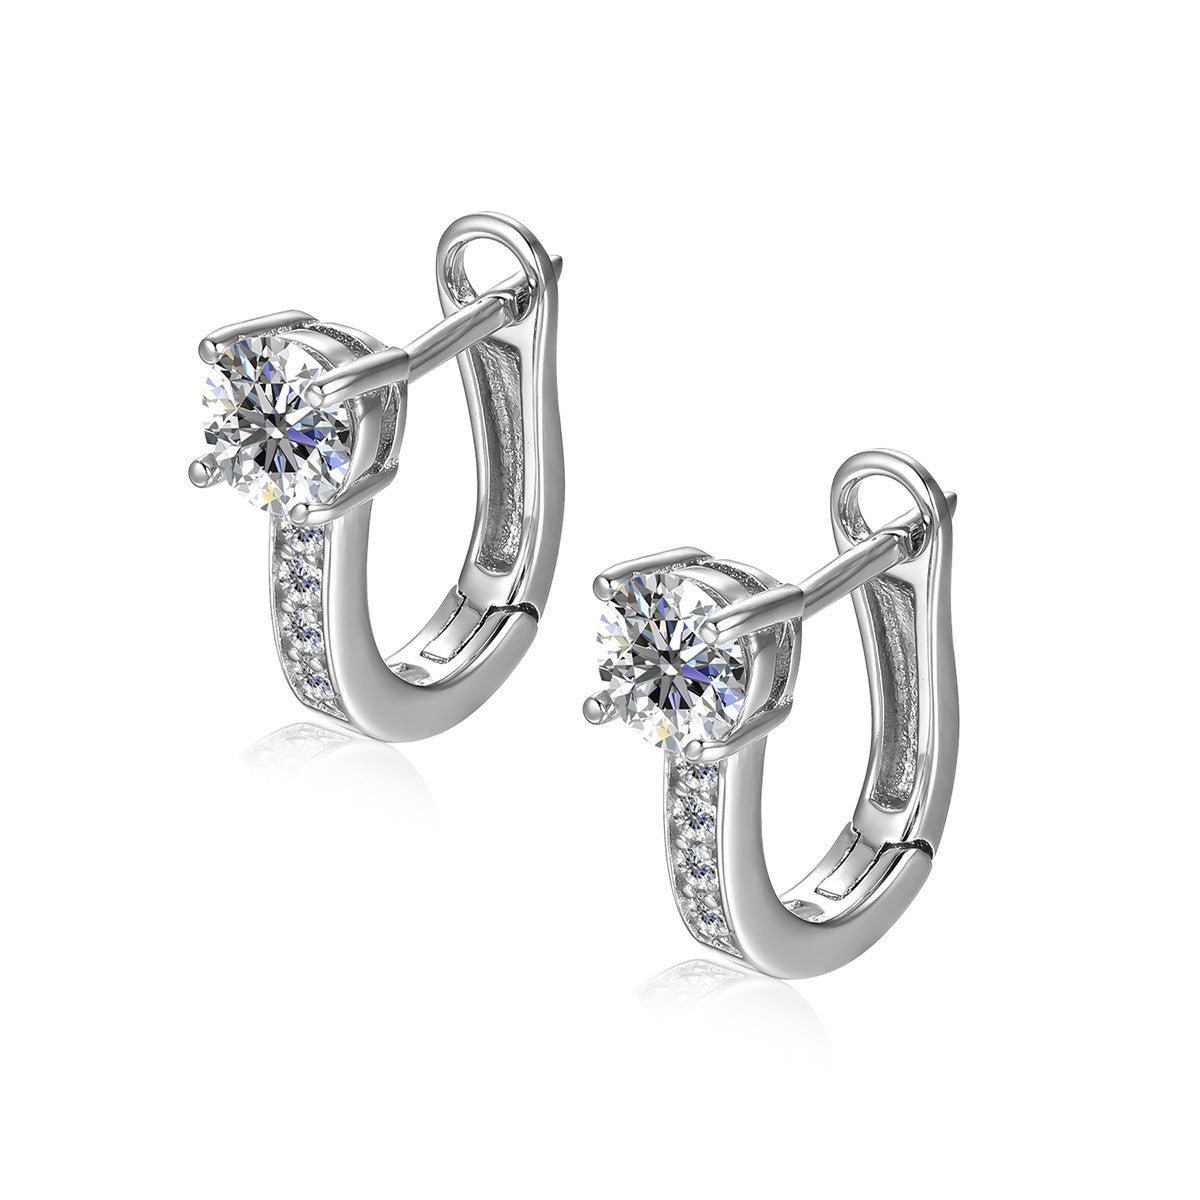 Moissanite by Cate & Chloe Genesis Sterling Silver Hoop Earrings with Moissanite and 5A Cubic Zirconia Crystals